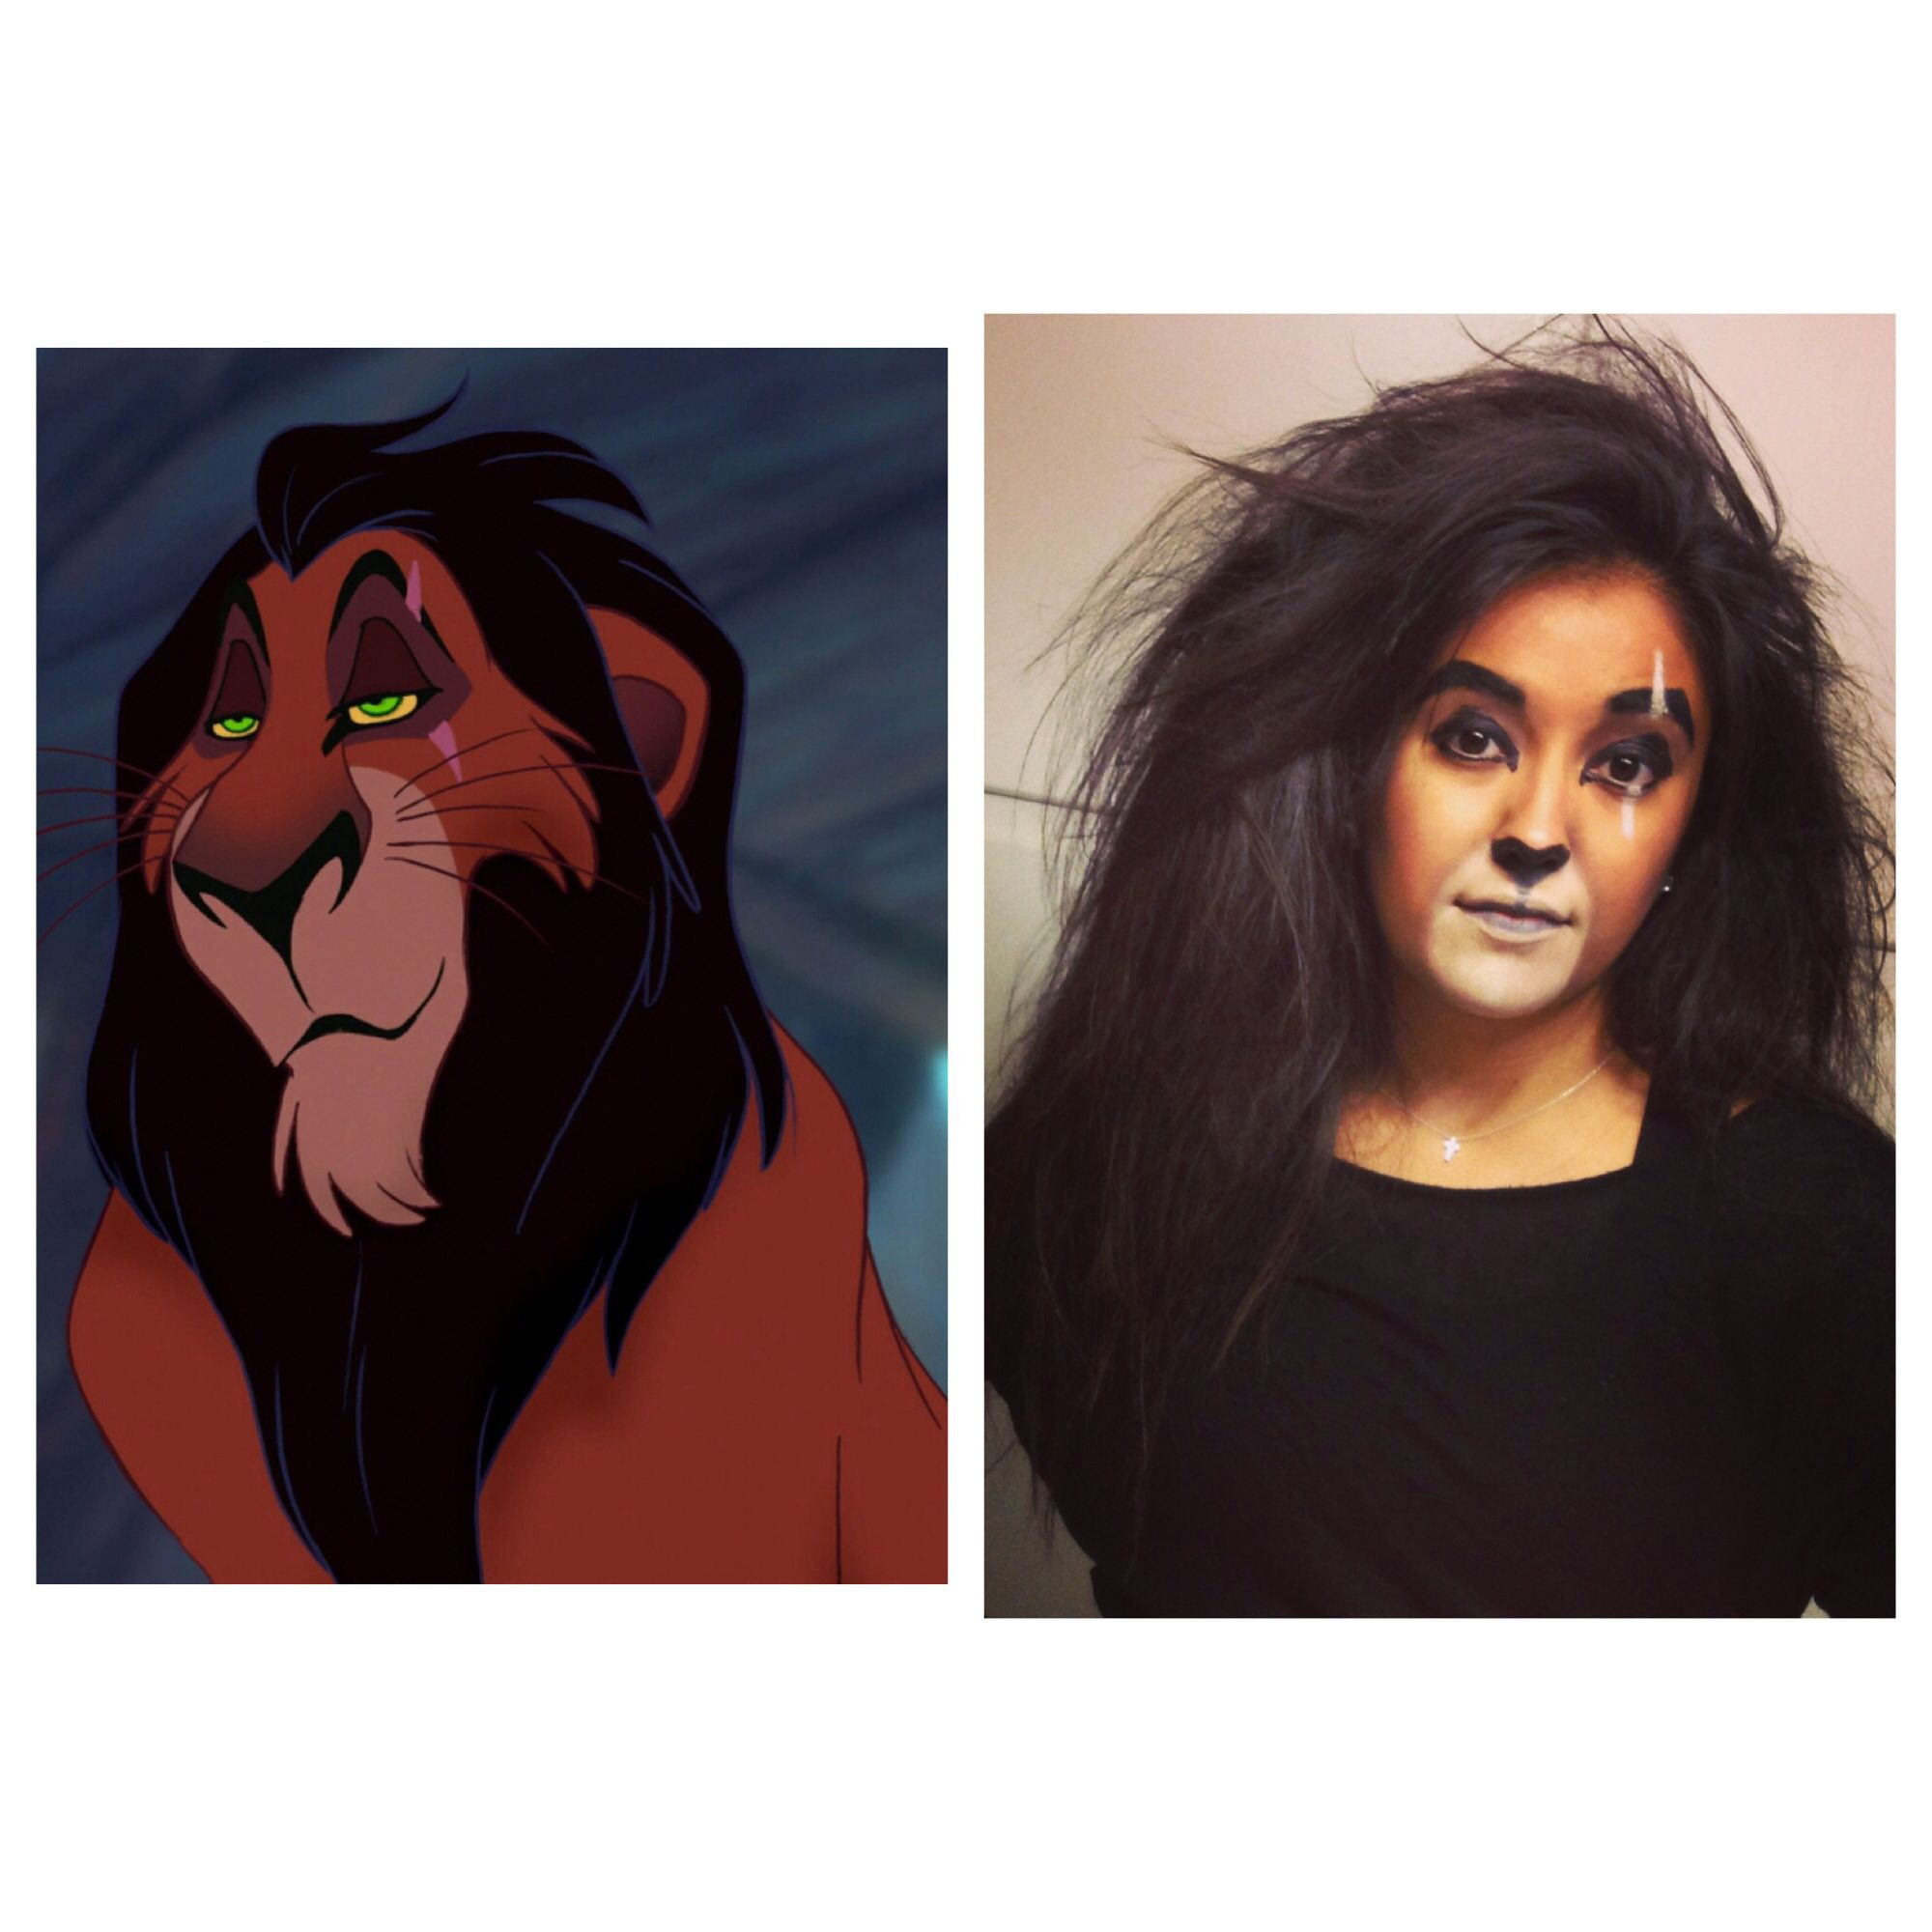 Lion King Costumes DIY
 Halloween costume as Scar from The Lion King